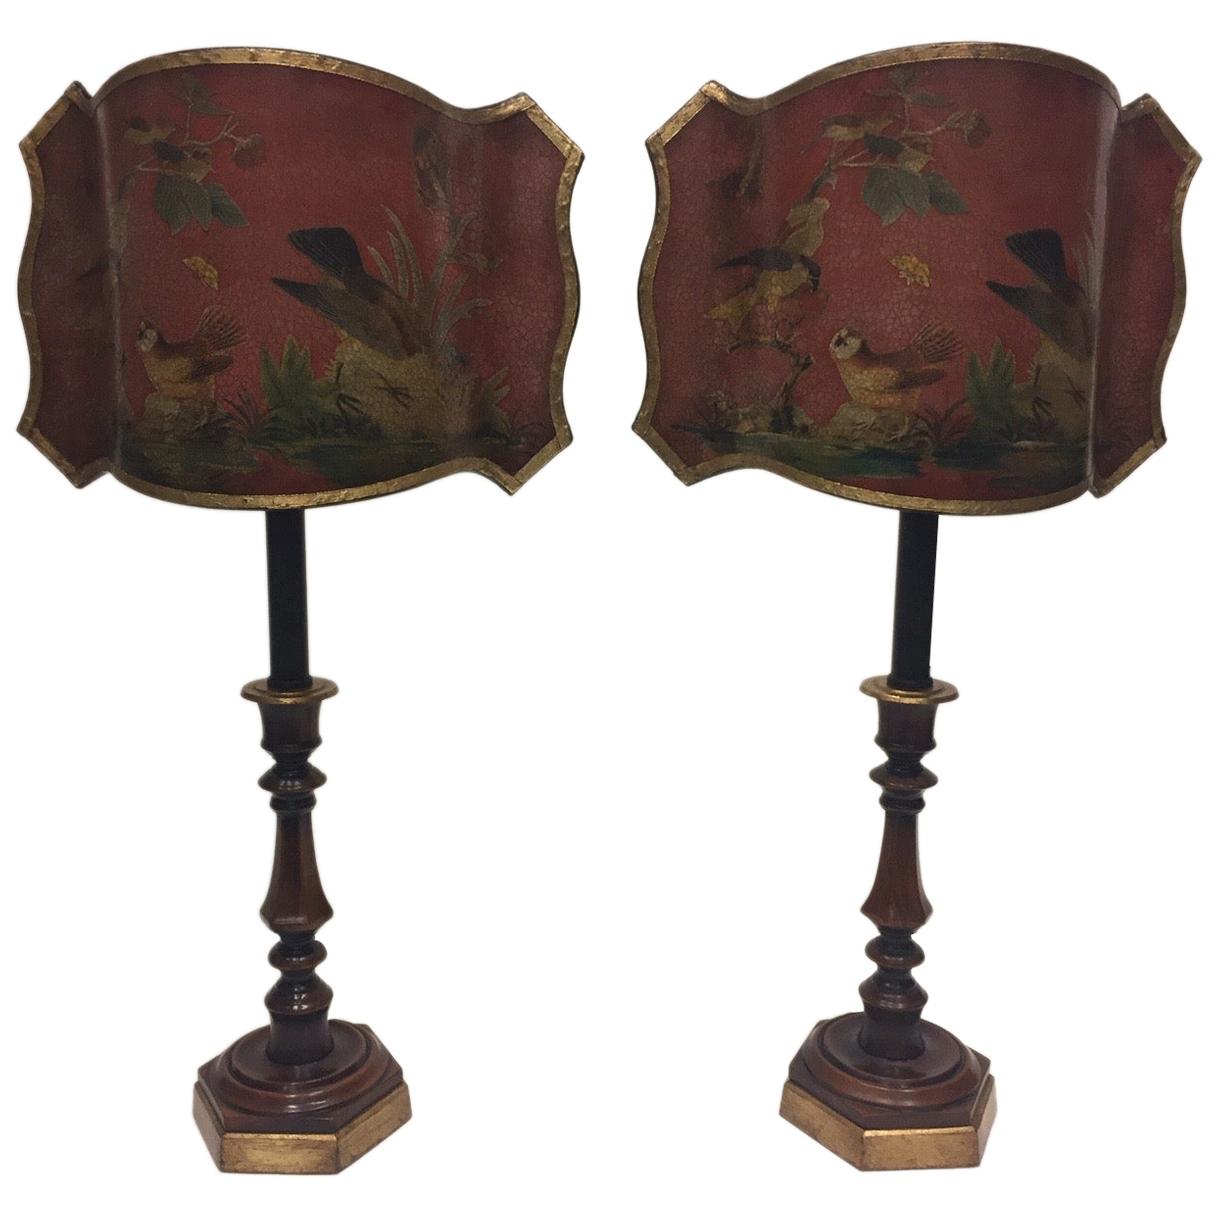 Wonderful Pair of Dark Red Candlestick Table Lamps with Fancy Decoupage Shades